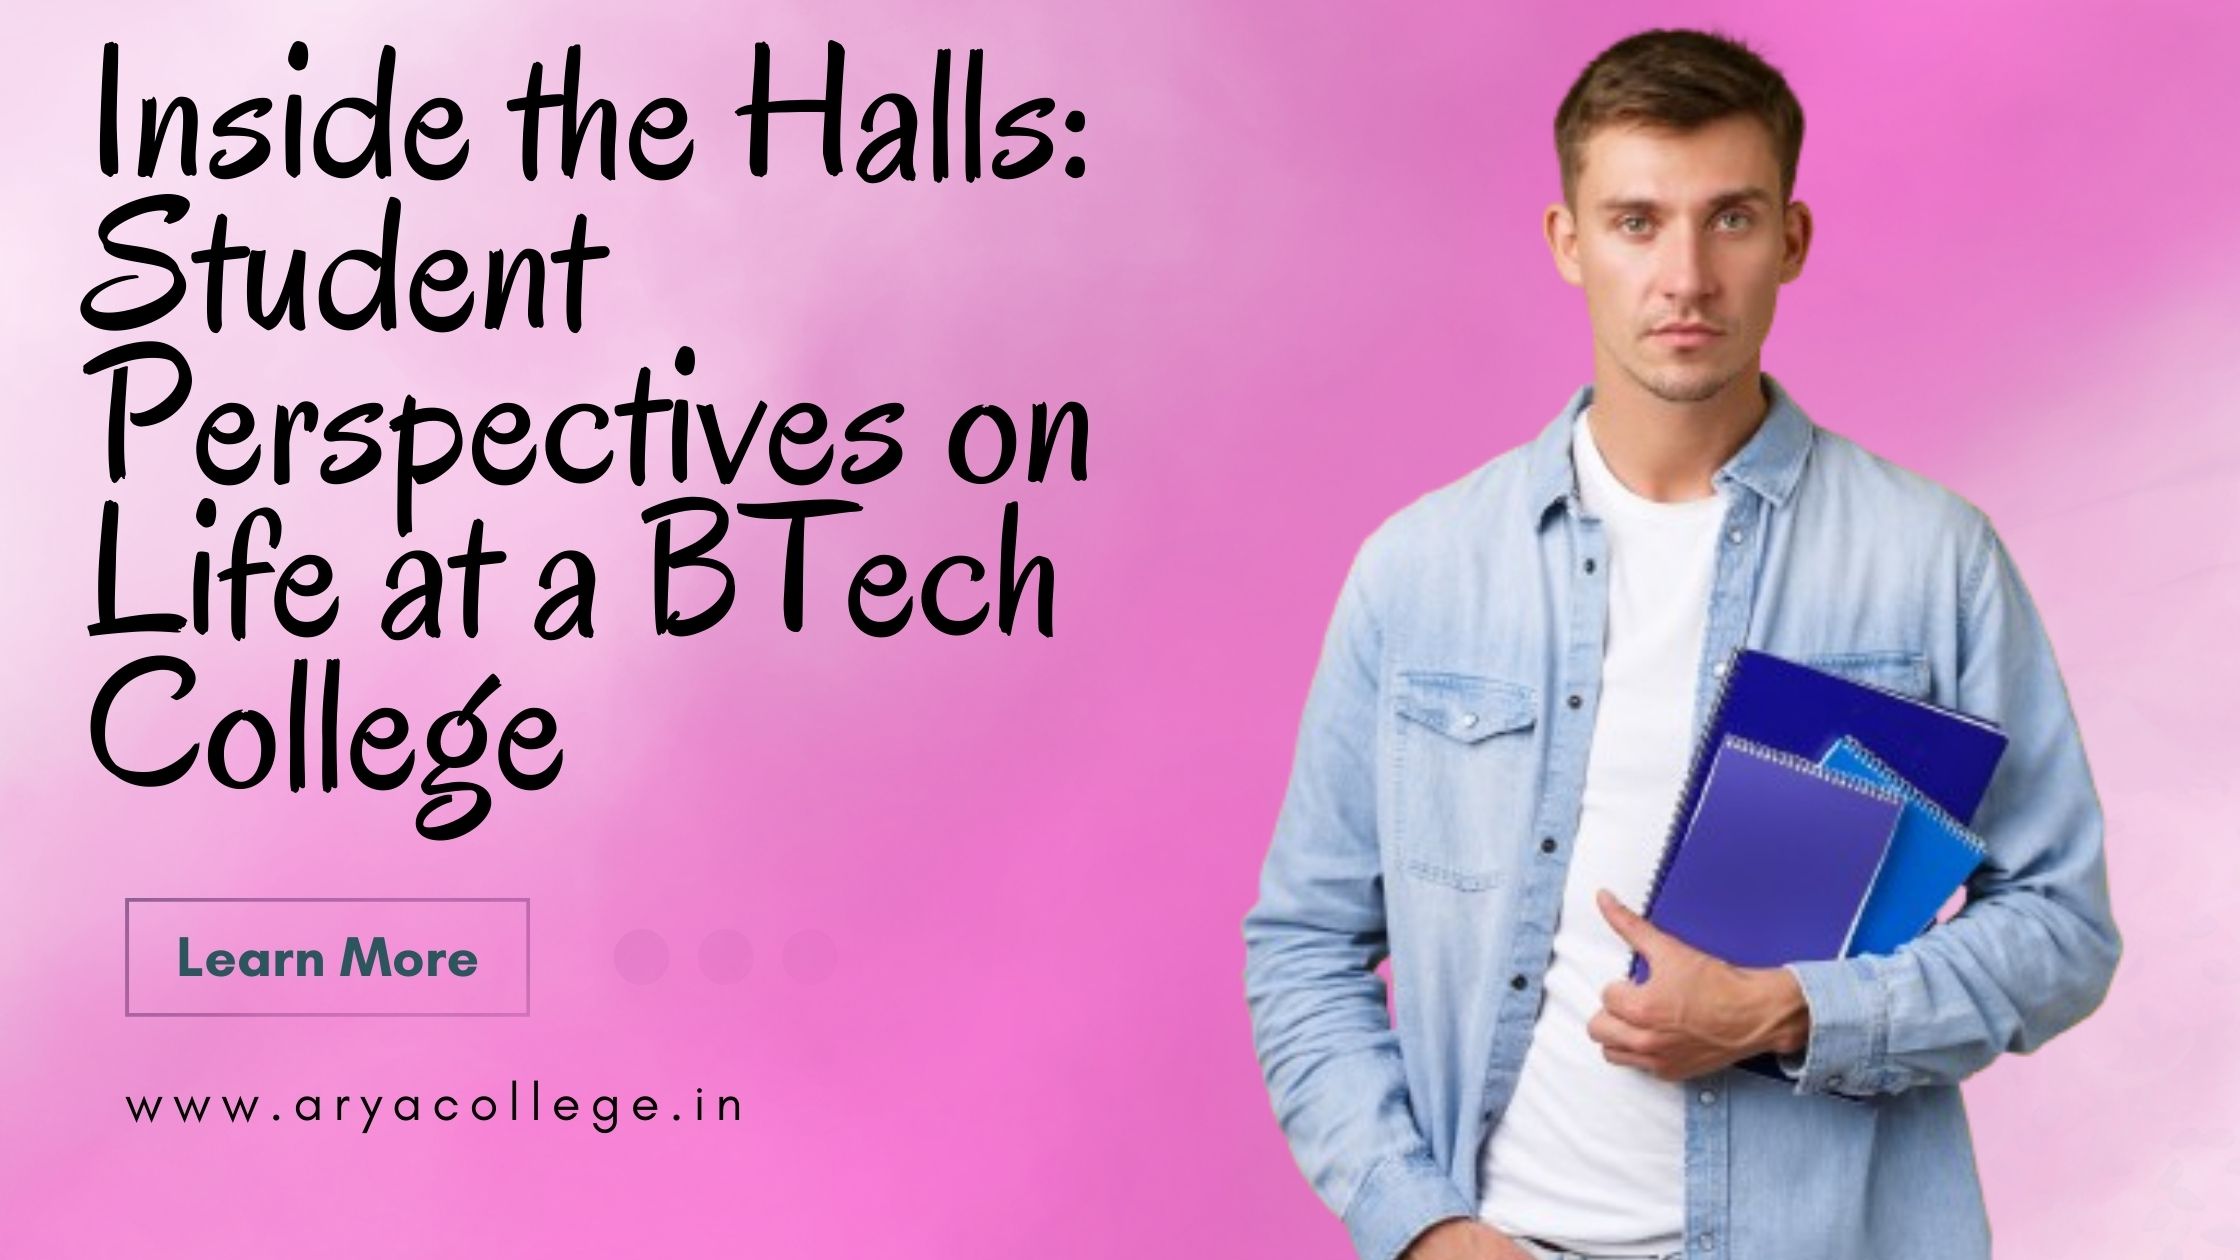 Inside the Halls: Student Perspectives on Life at a BTech College